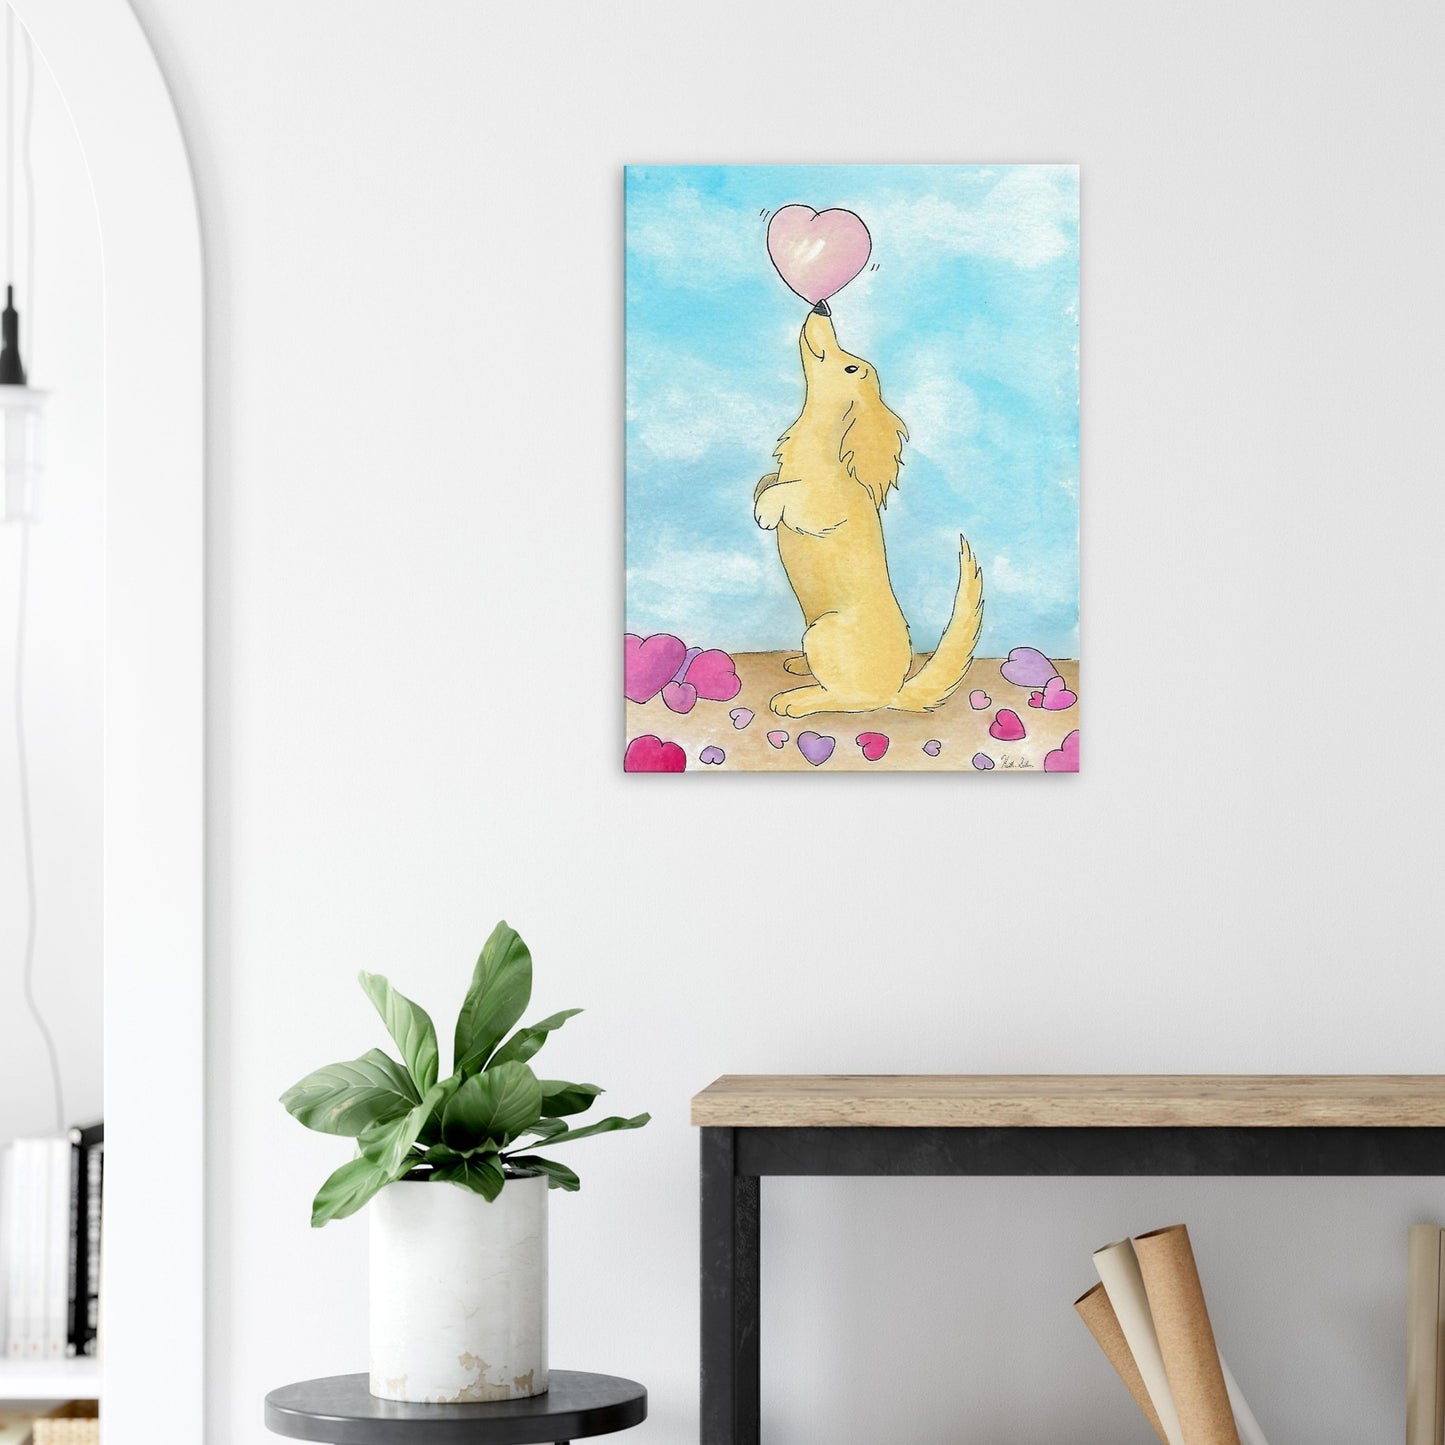 24 by 32 inch canvas wall art print of Heather Silver's watercolor painting, Puppy Love. It features a cute dog balancing a pink heart on its nose against a blue sky background. Canvas shown on wall above wooden end table and potted plant.